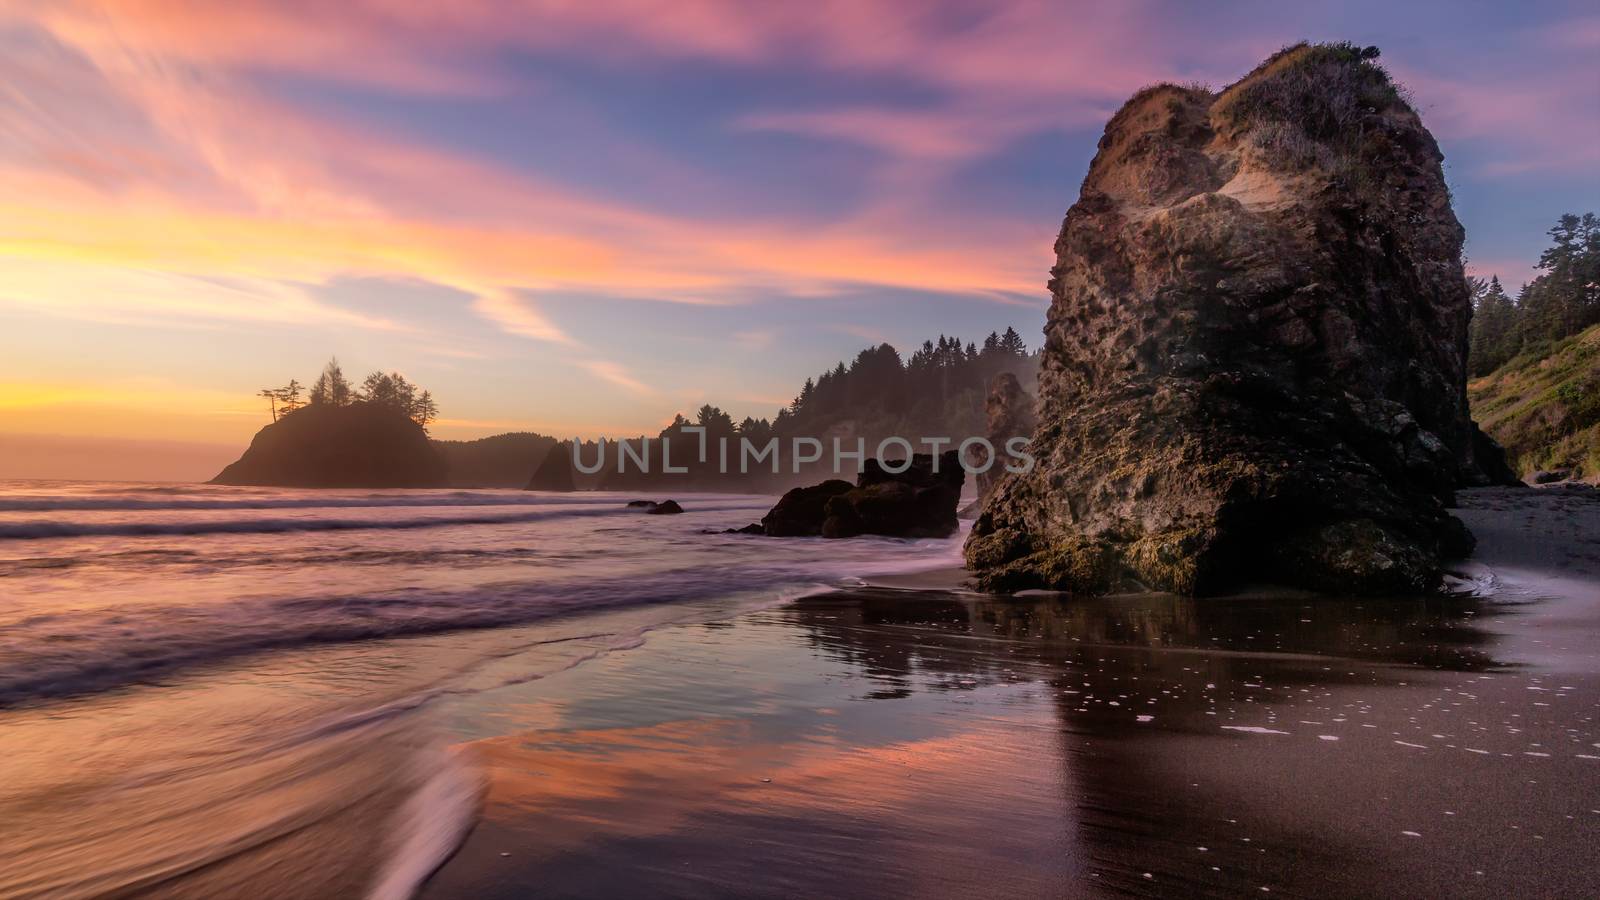 Evening Sunset at a Tropical Rocky Beach by backyard_photography